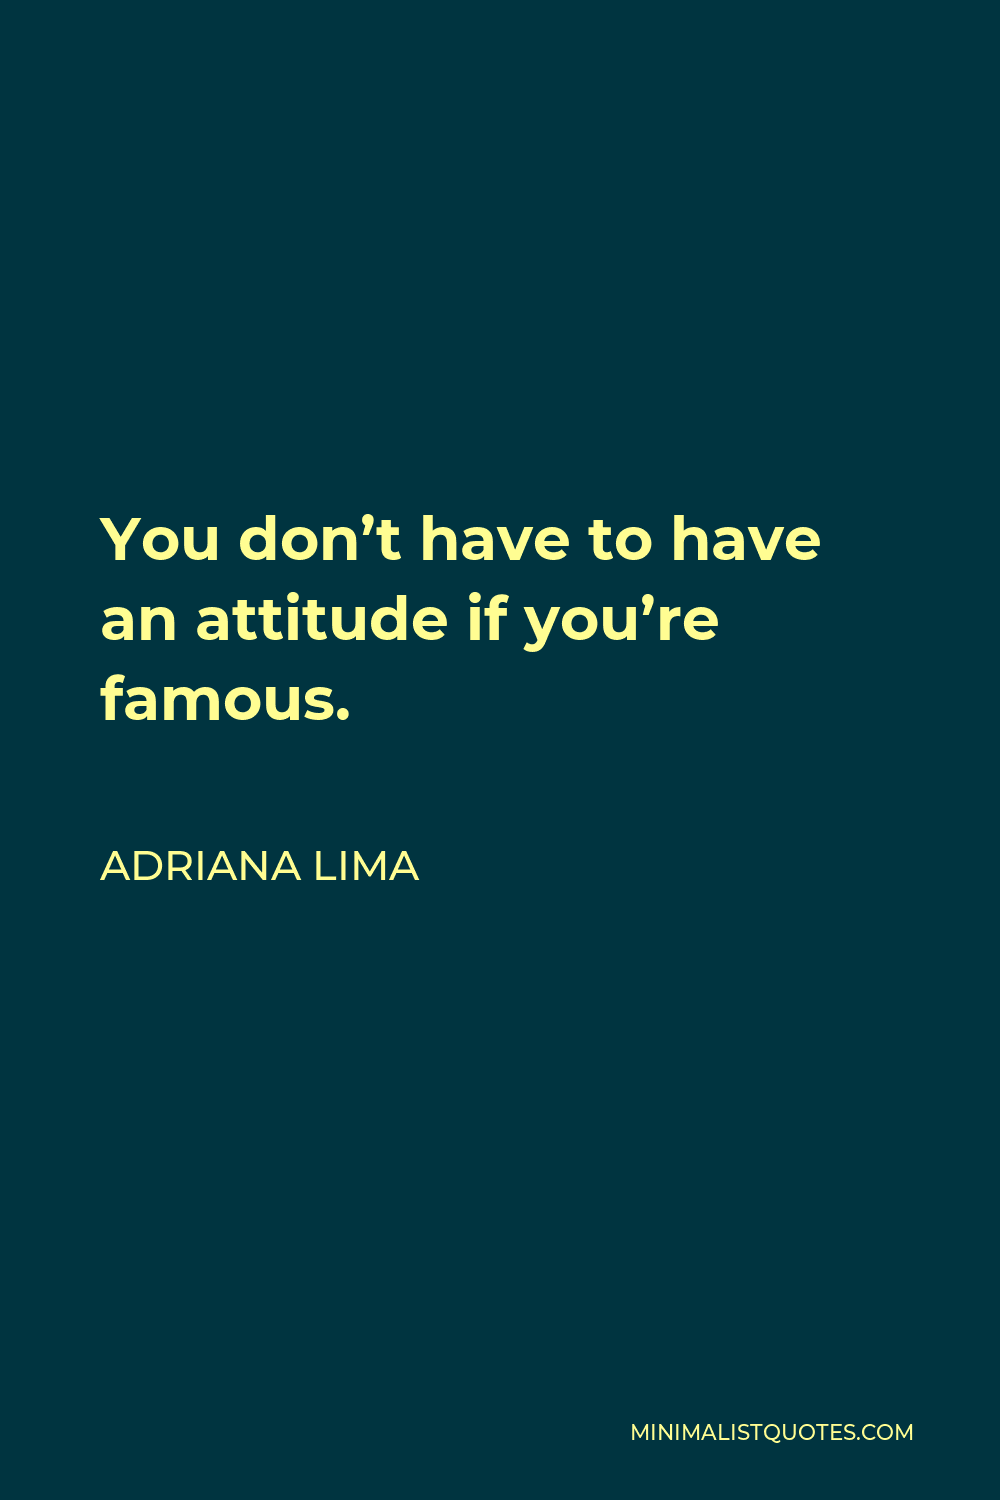 Adriana Lima Quote - You don’t have to have an attitude if you’re famous.